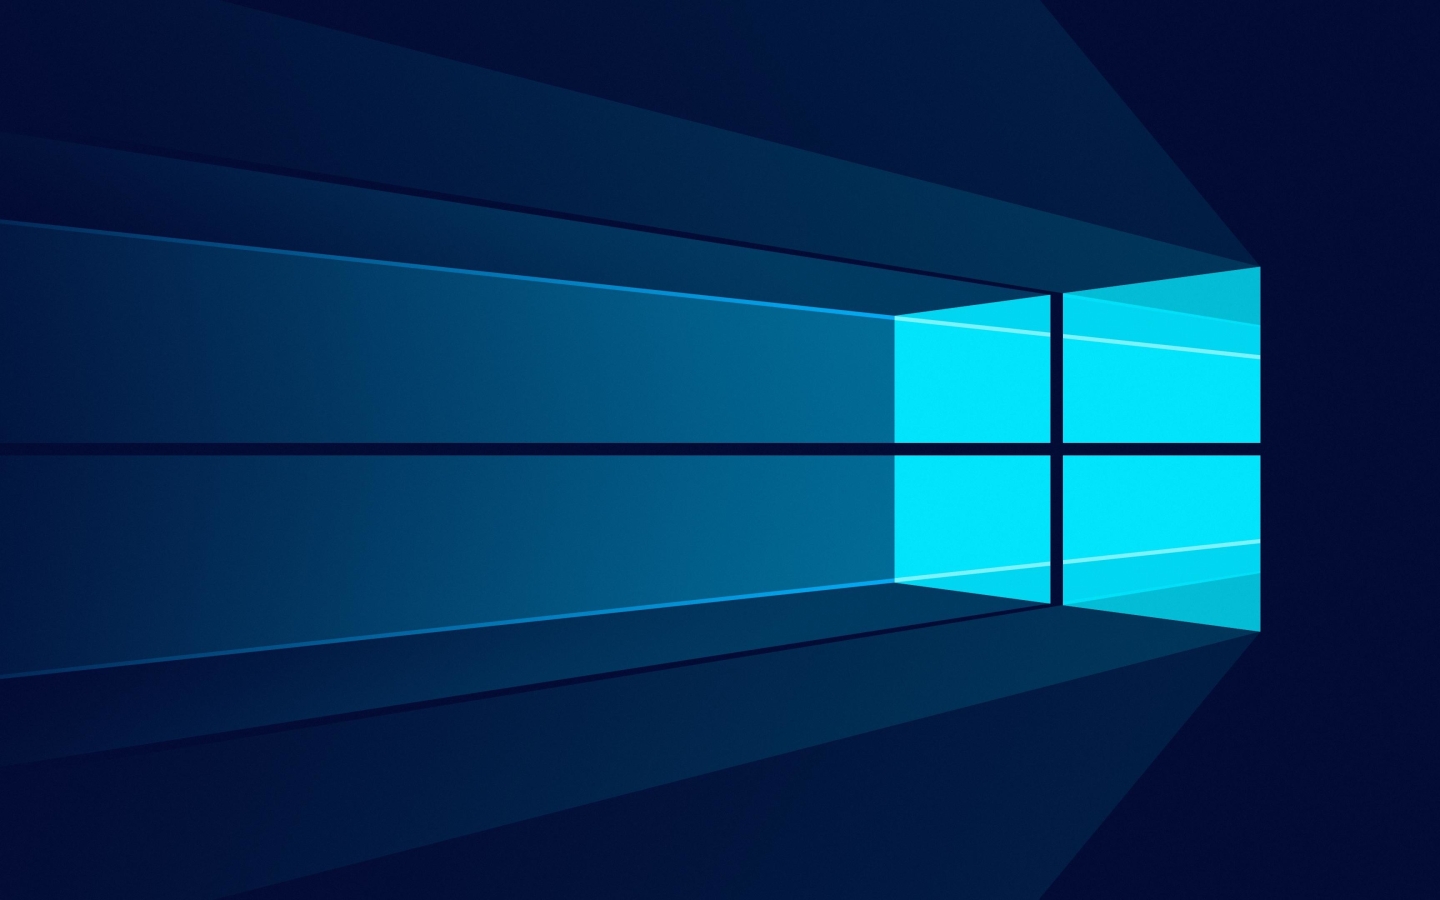 1440x900 Windows 10 Minimal 1440x900 Wallpaper Hd Minimalist 4k Wallpapers Images Photos And Background Wallpapers Den